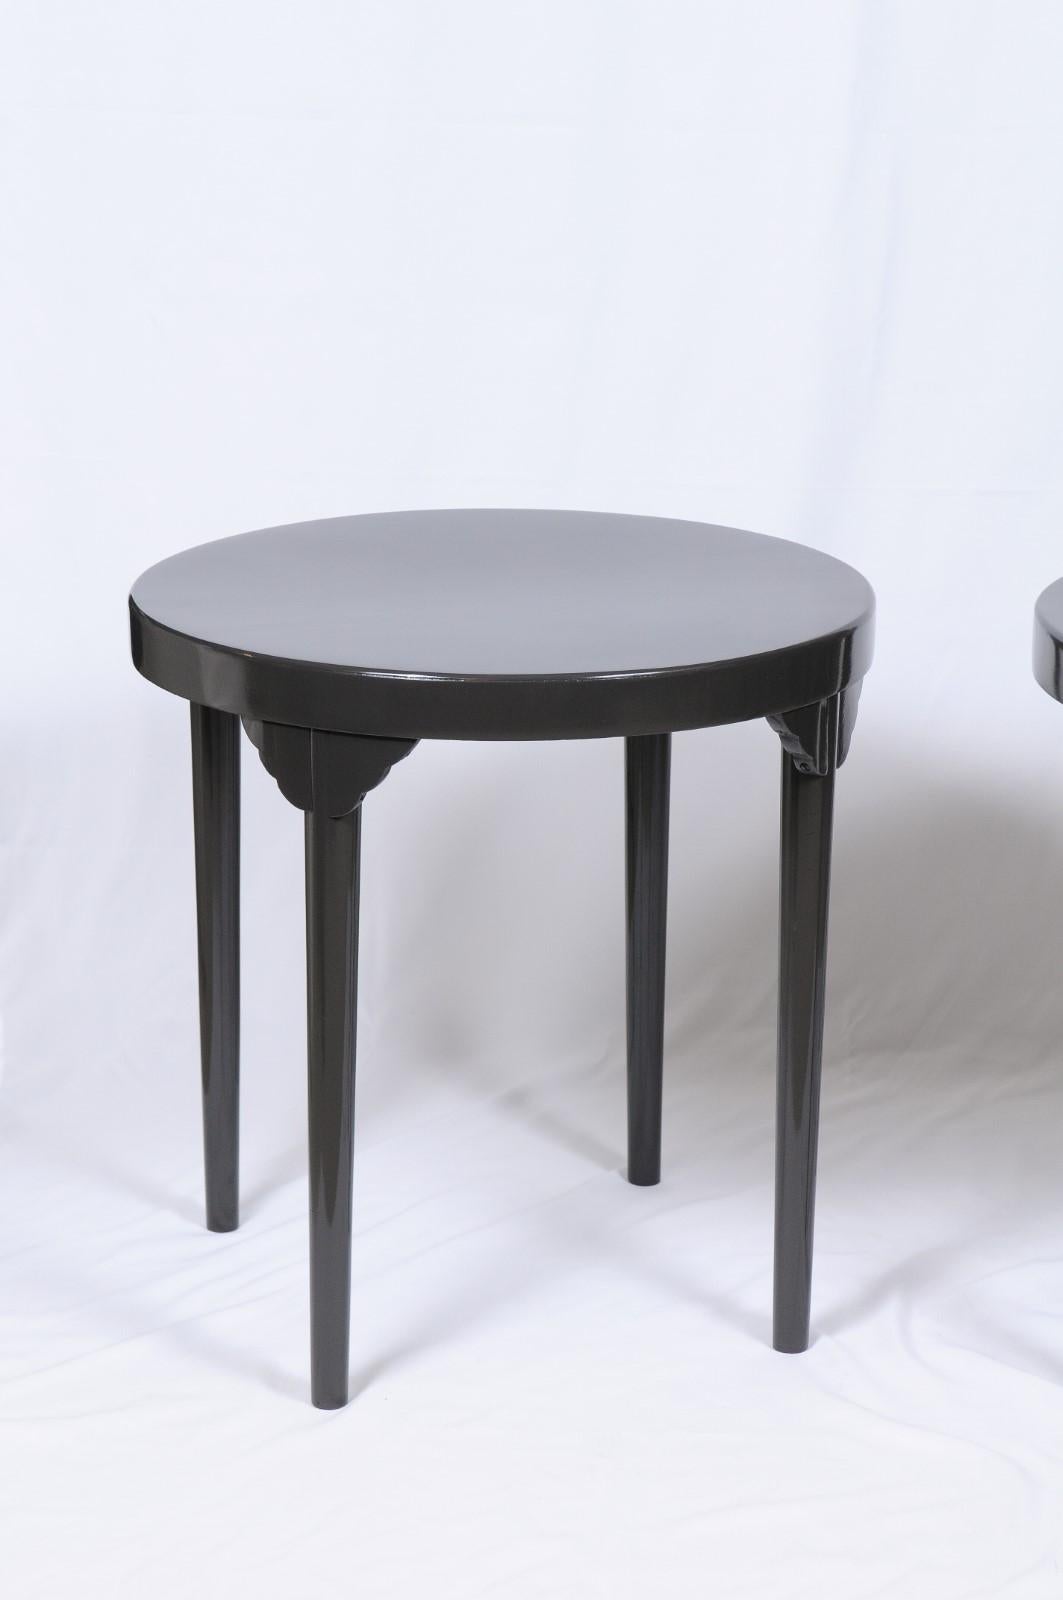 Austrian Art Nouveau Period Thonet Labeled and Ebonized Table From Vienna